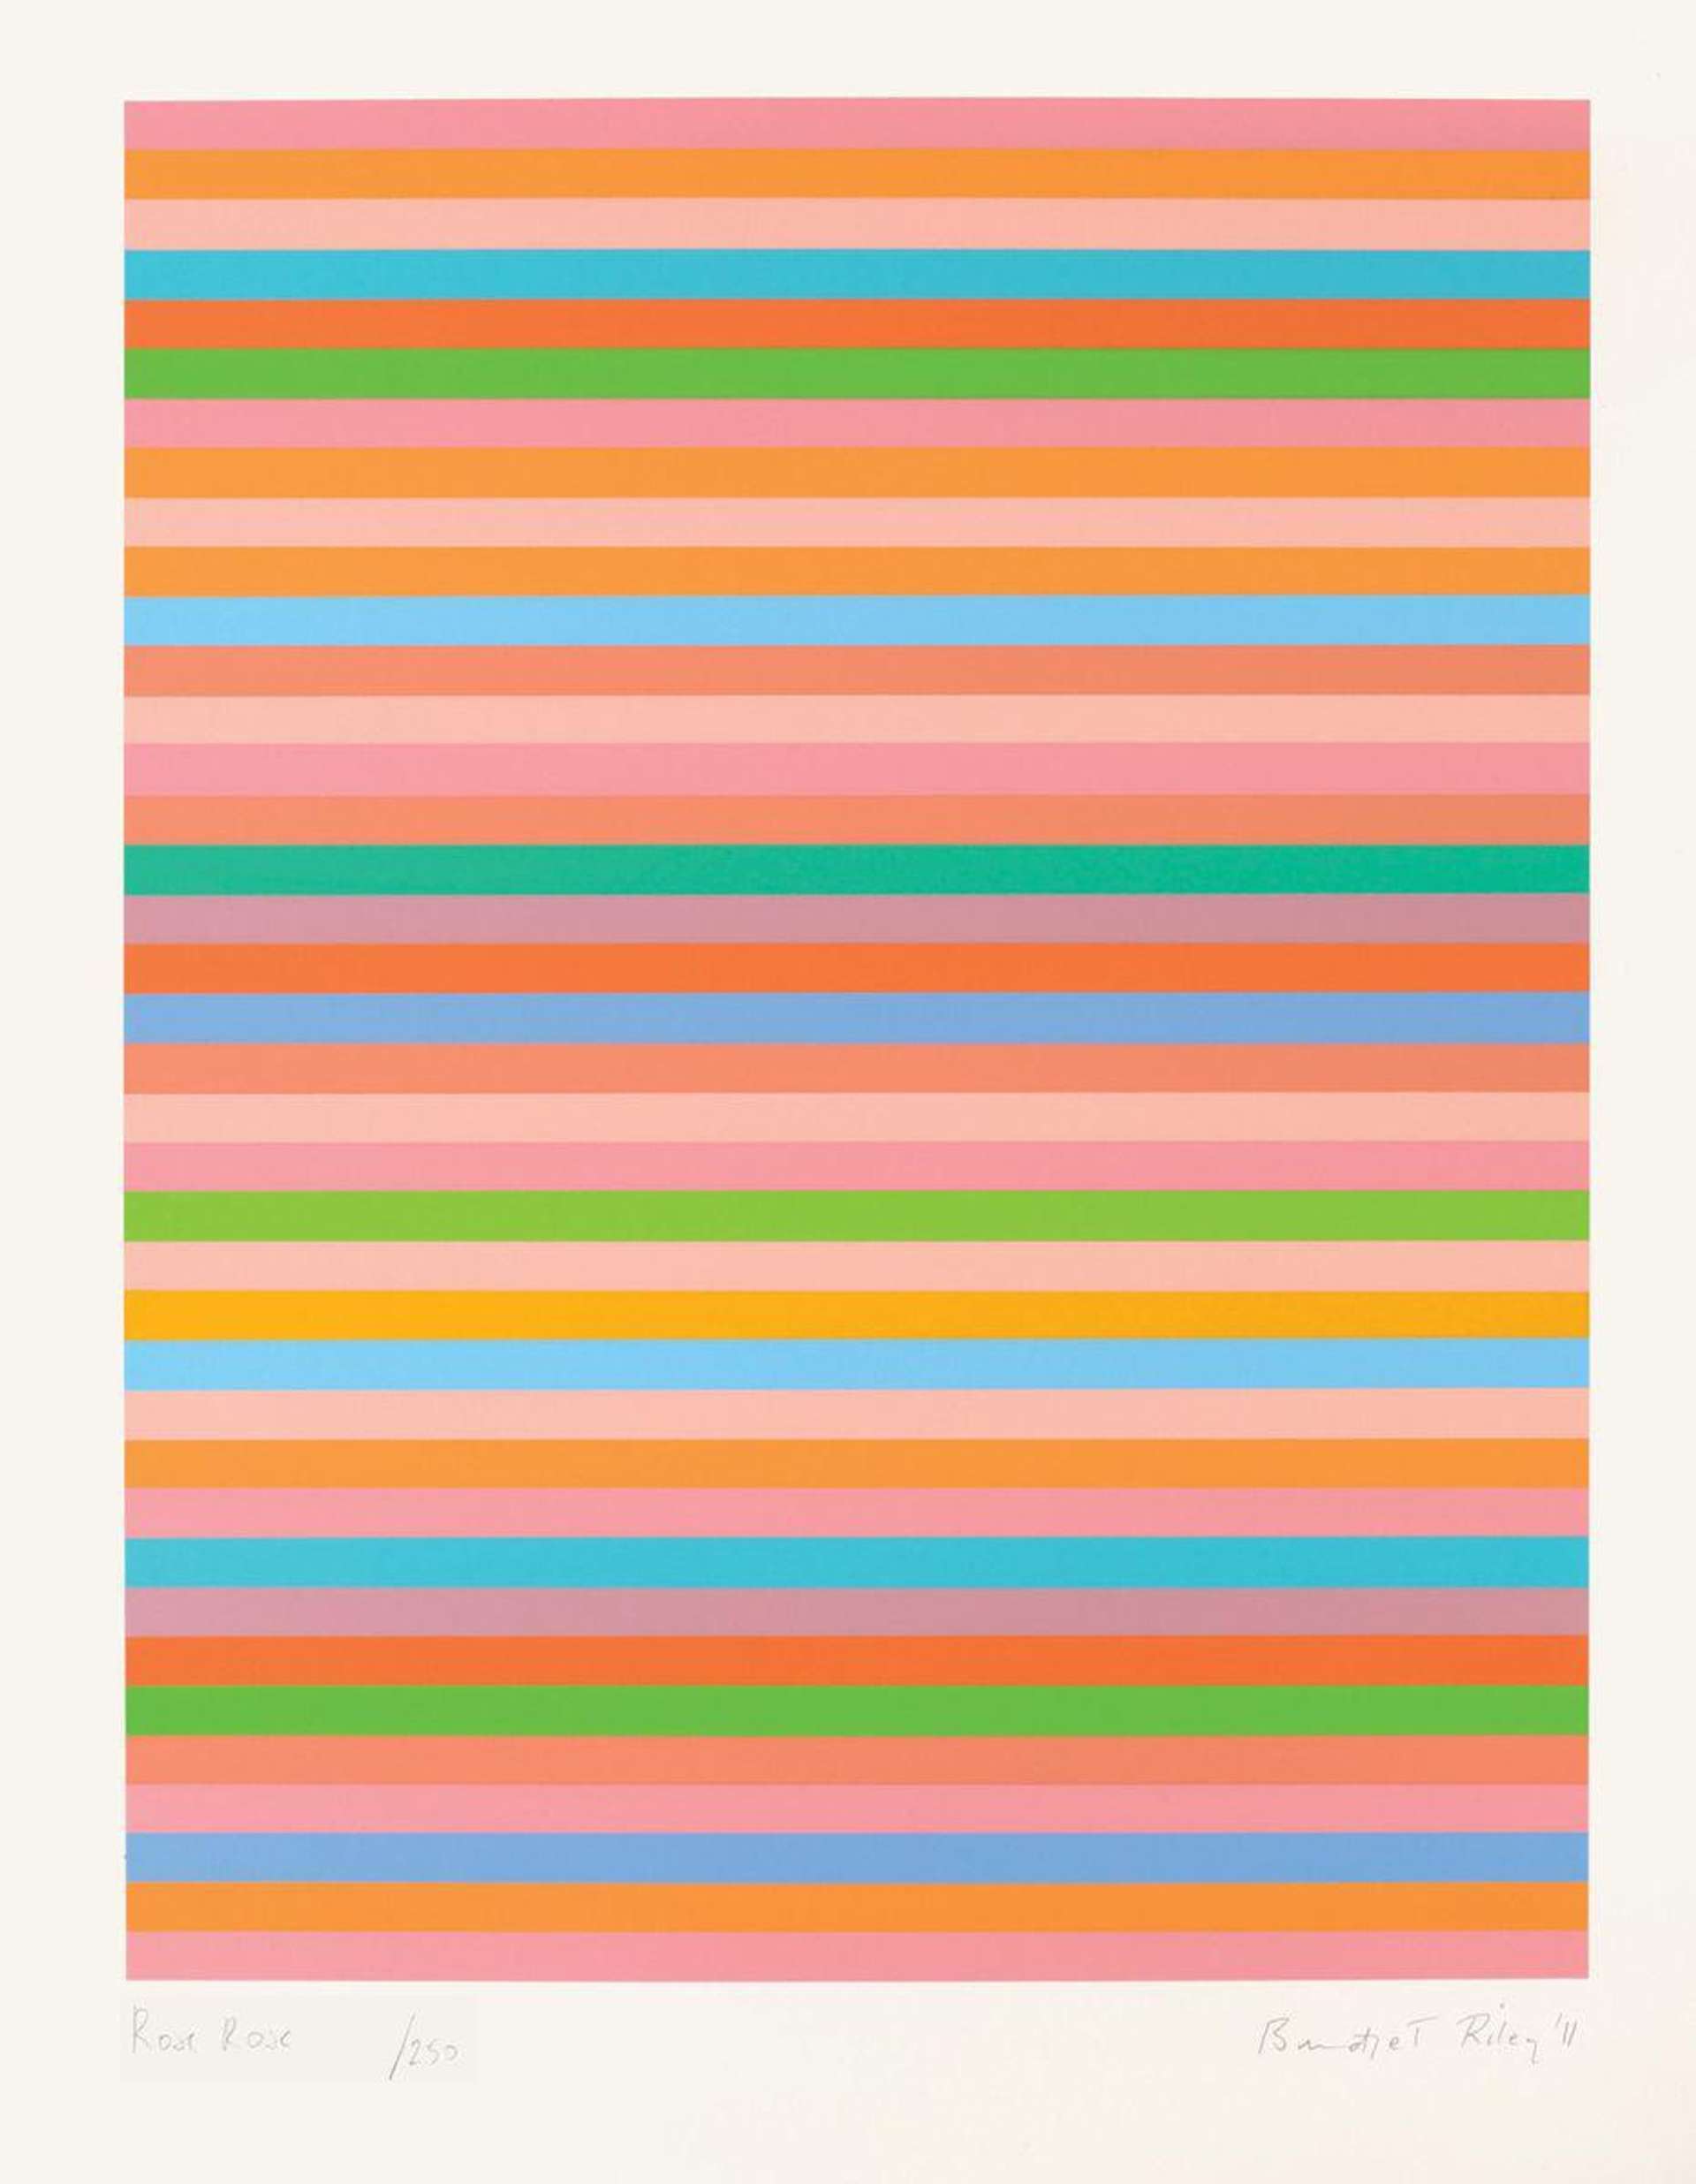 A series of thin horizontal stripes in oranges, pinks, greens and blues, framed by white borders.